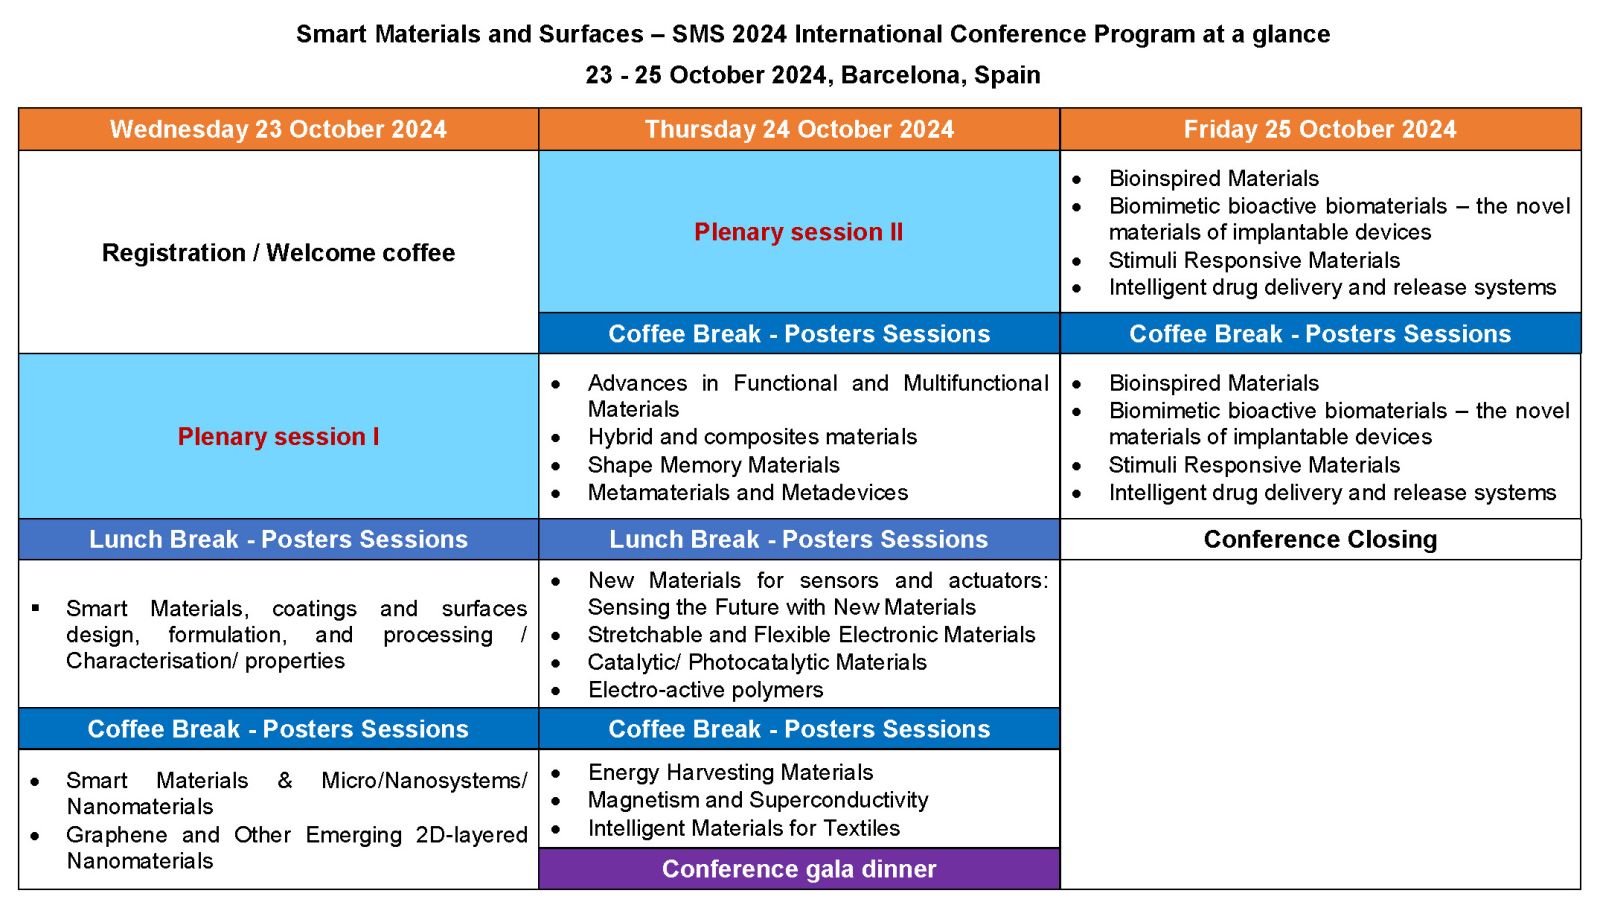 SMS 2024 Conference Program at a Glance